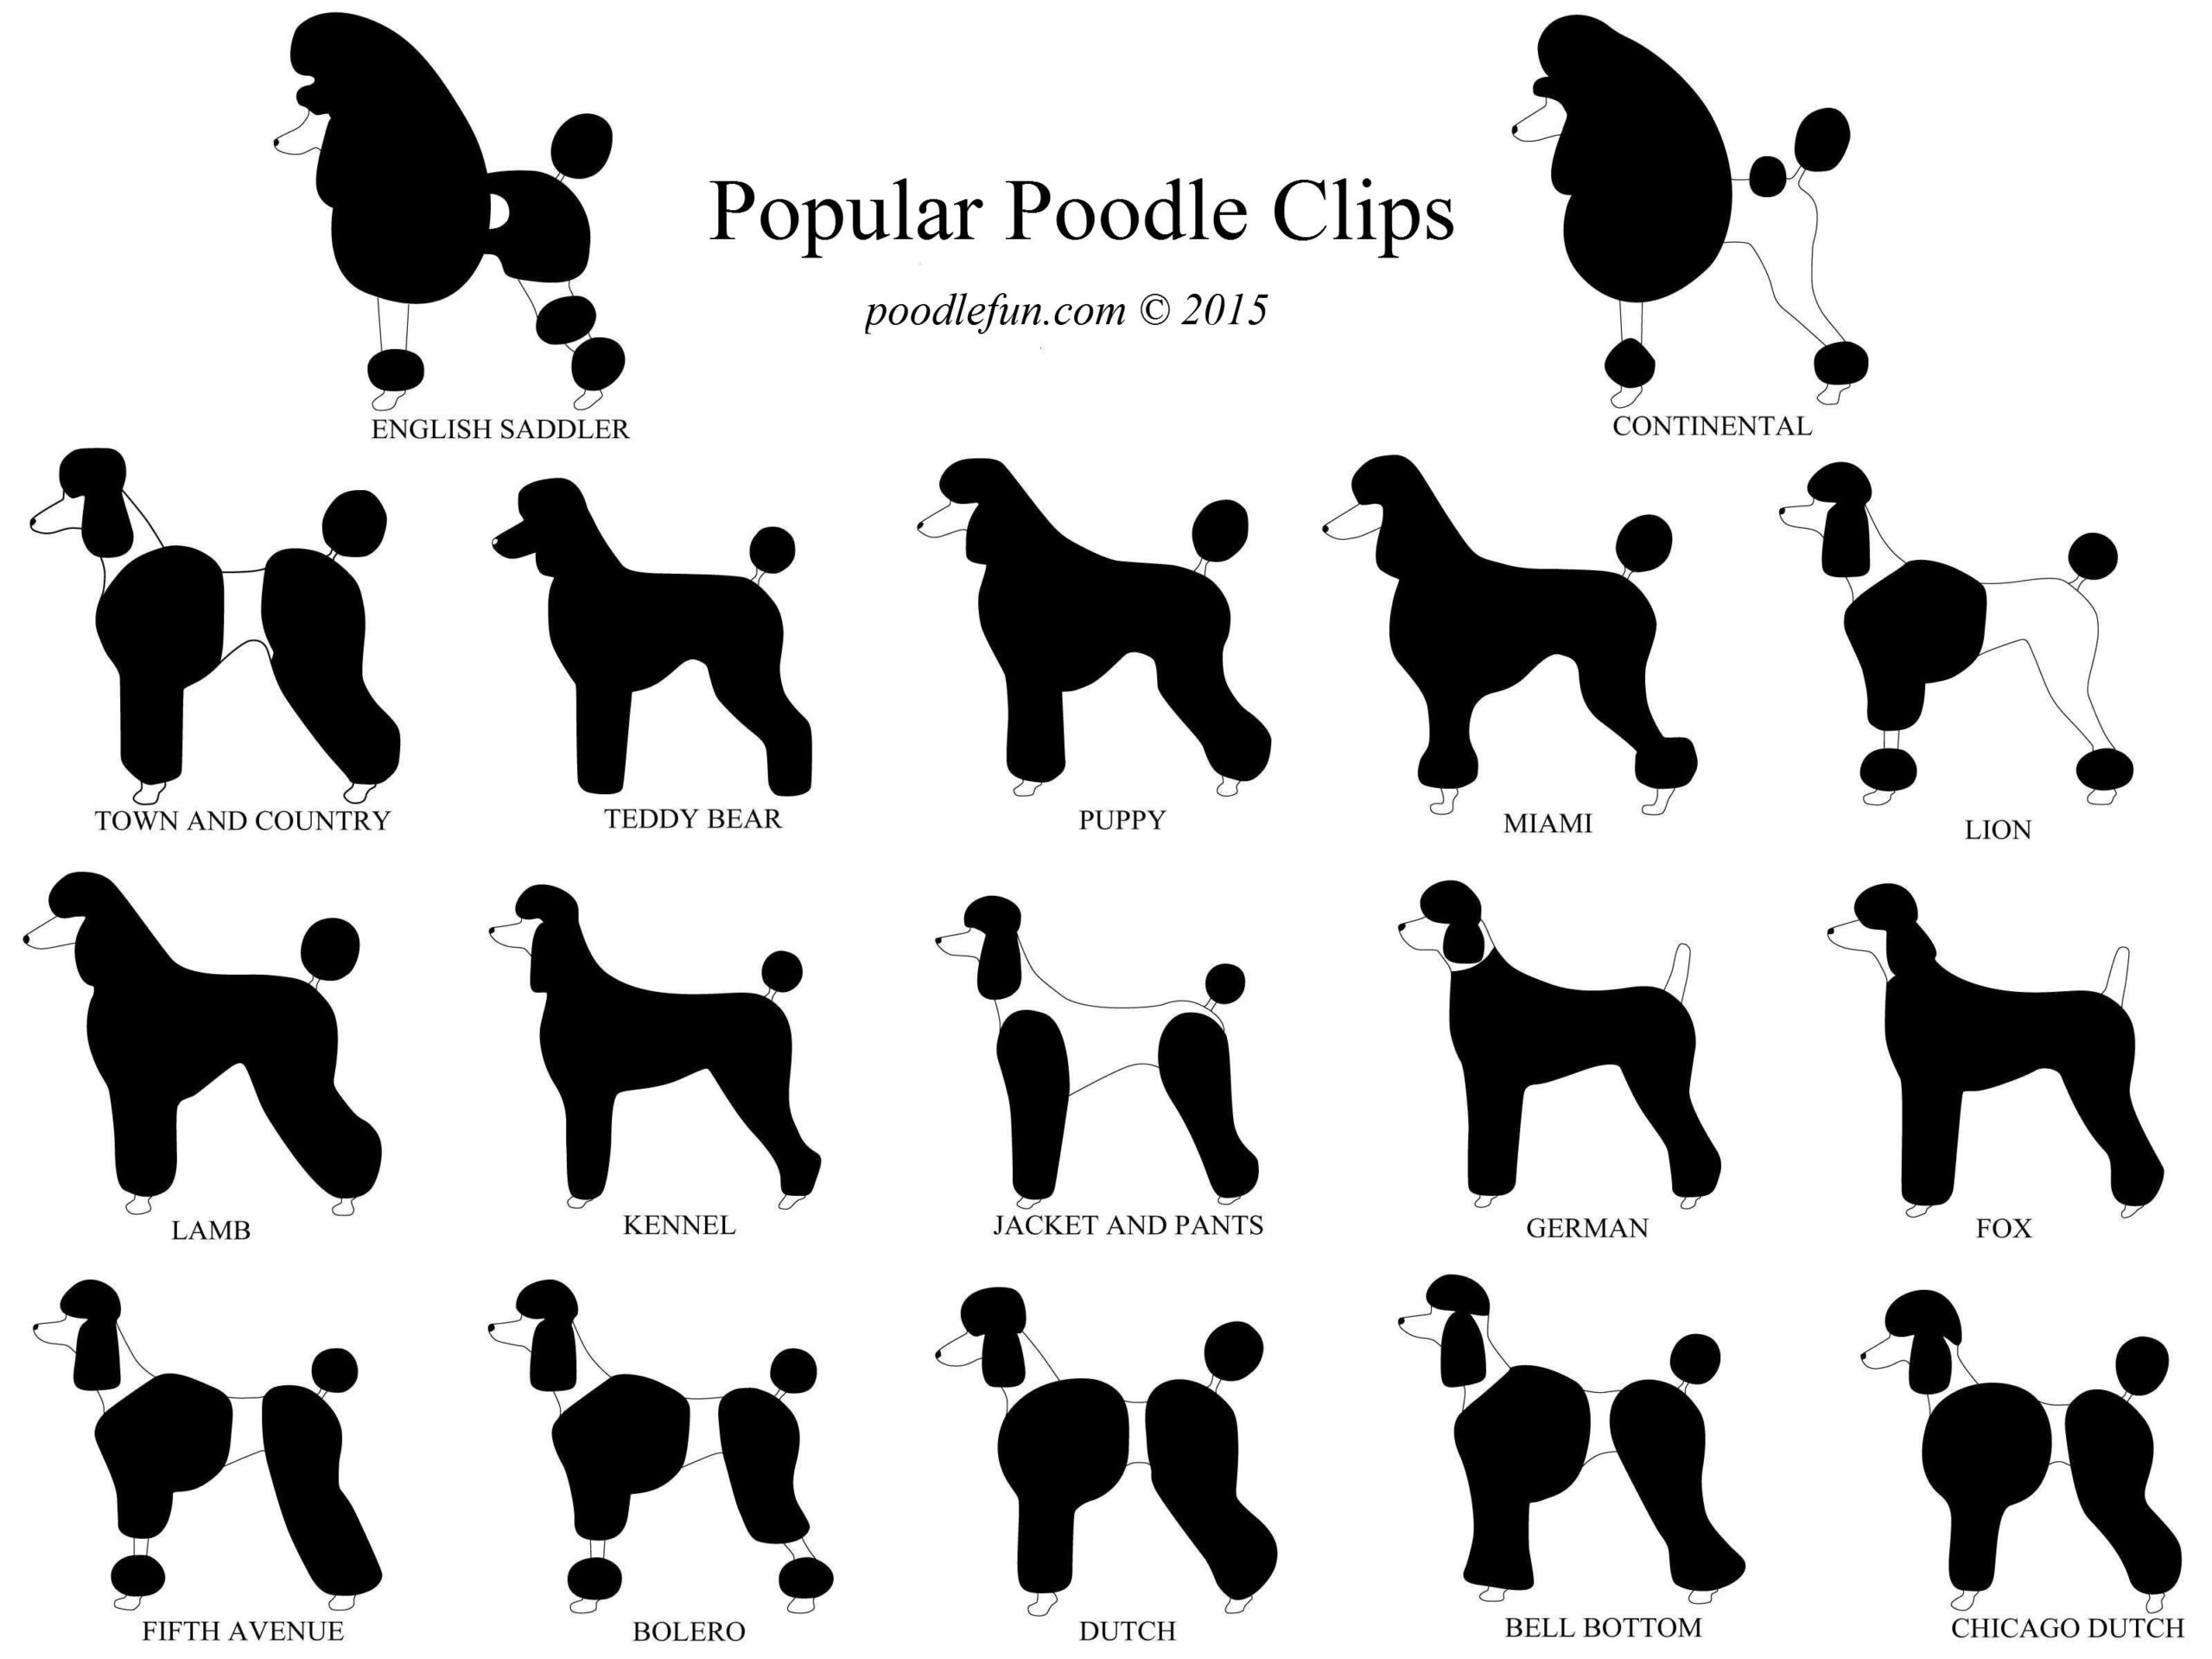 4. Standard Poodle Haircuts: From Puppy Cut to Continental Clip - wide 4